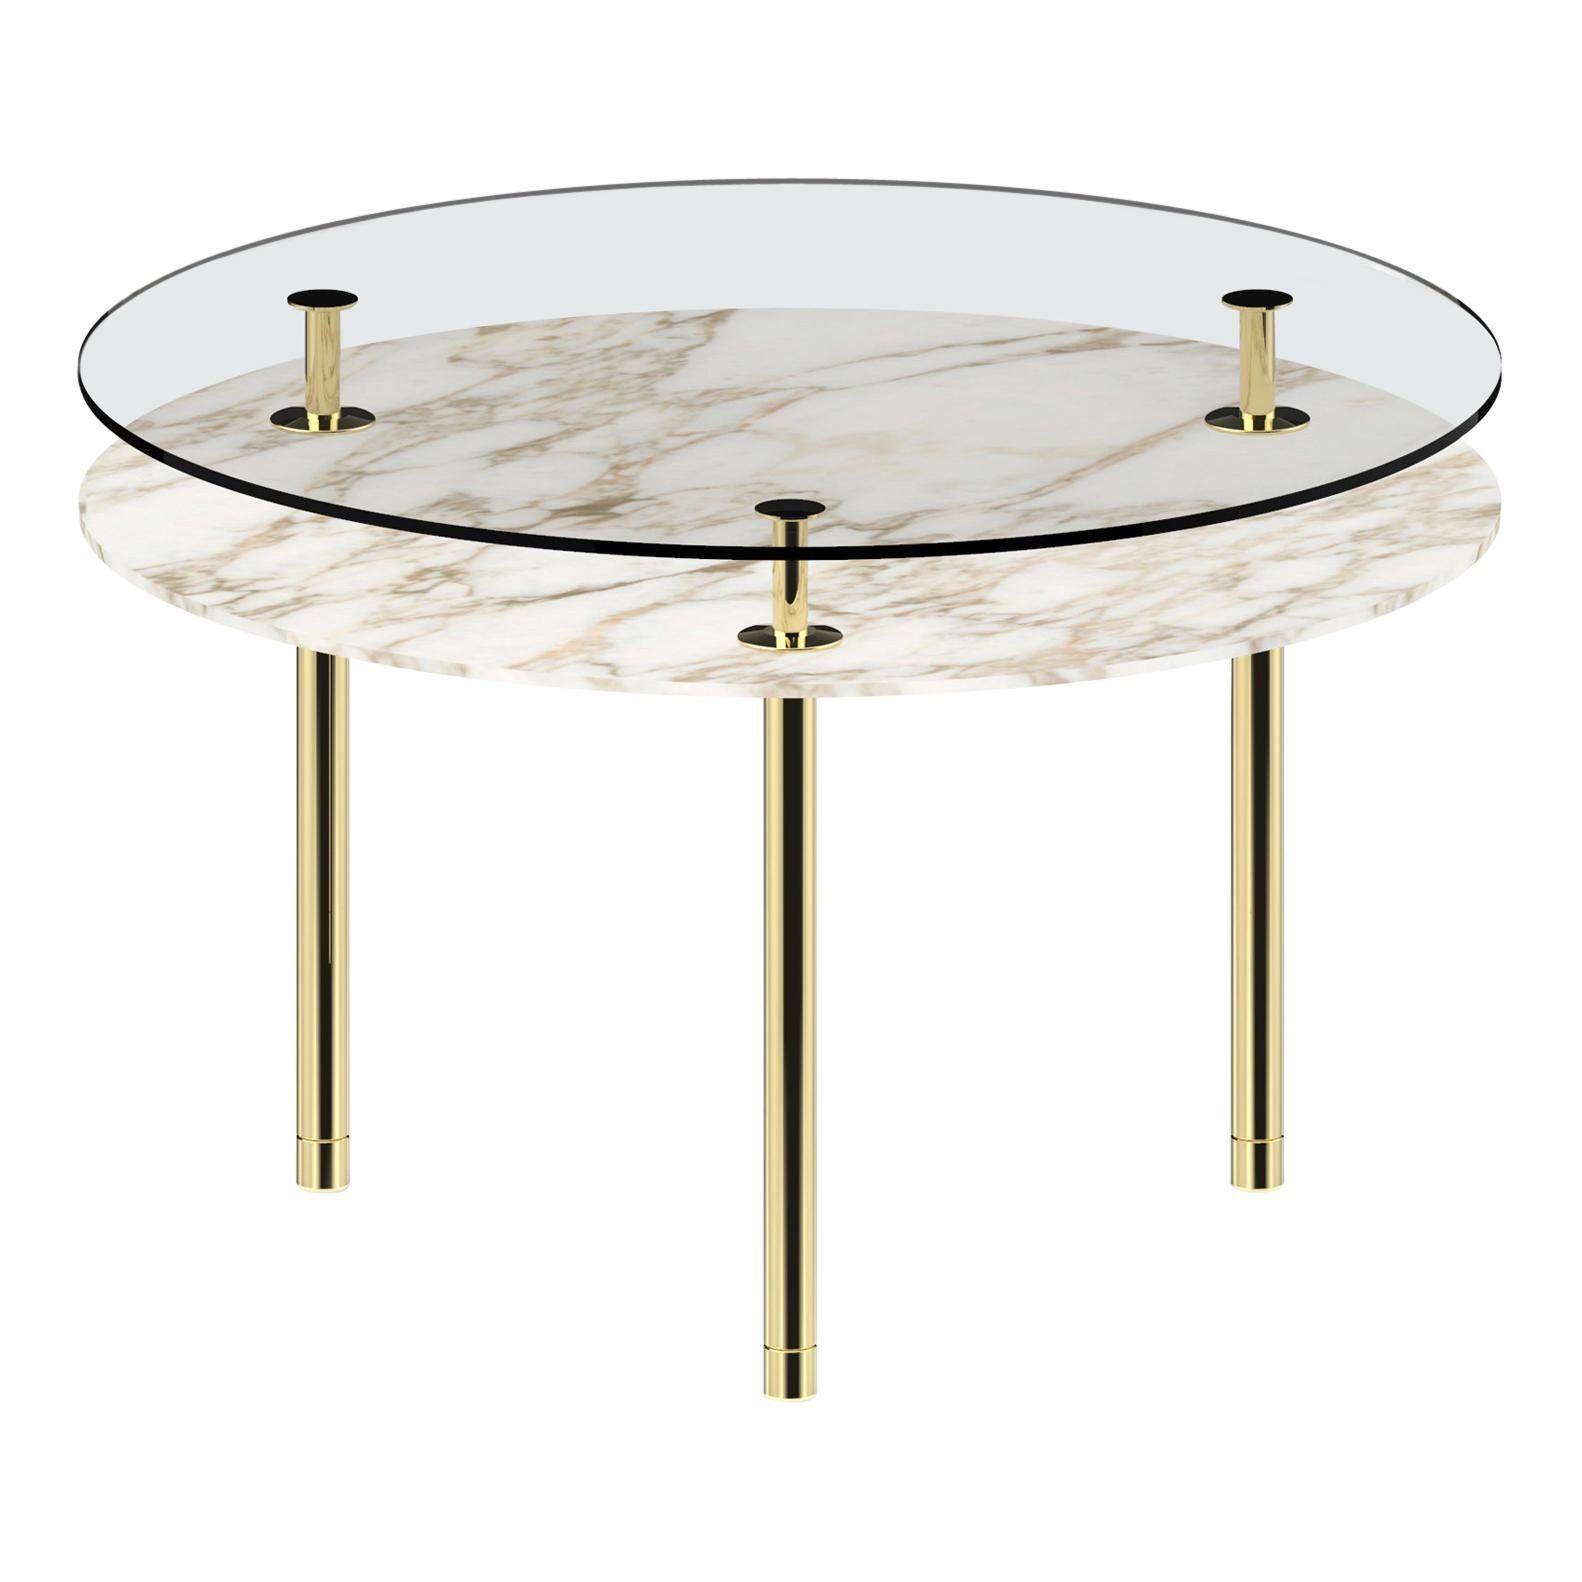 Gold (Polished Brass) Ghidini 1961 Legs Round Dining Table with Calacatta Gold Marble Top